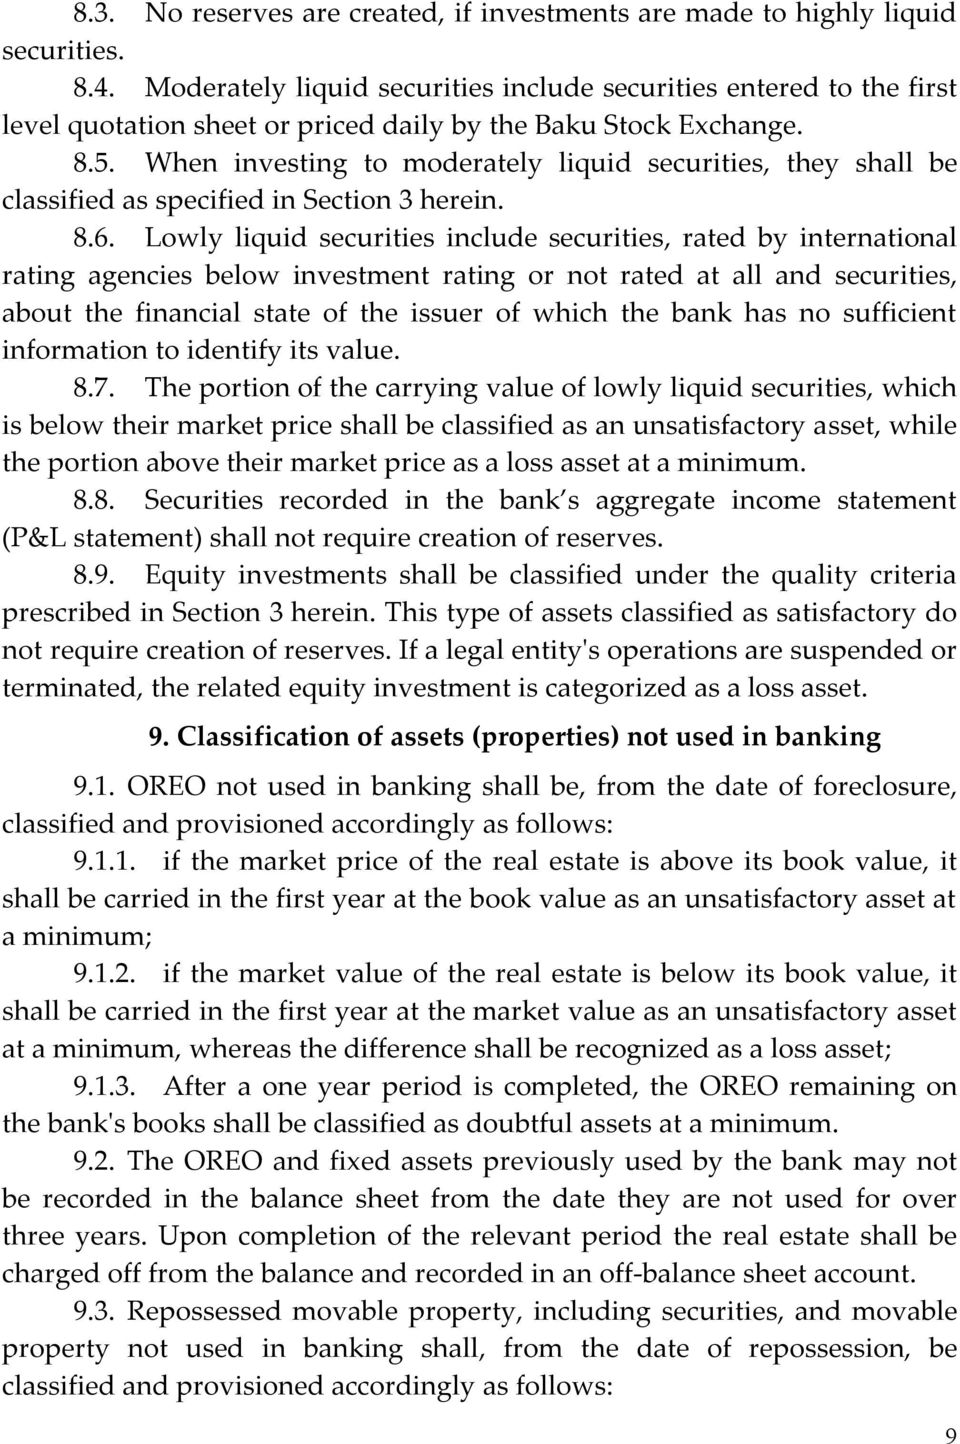 When investing to moderately liquid securities, they shall be classified as specified in Section 3 herein. 8.6.